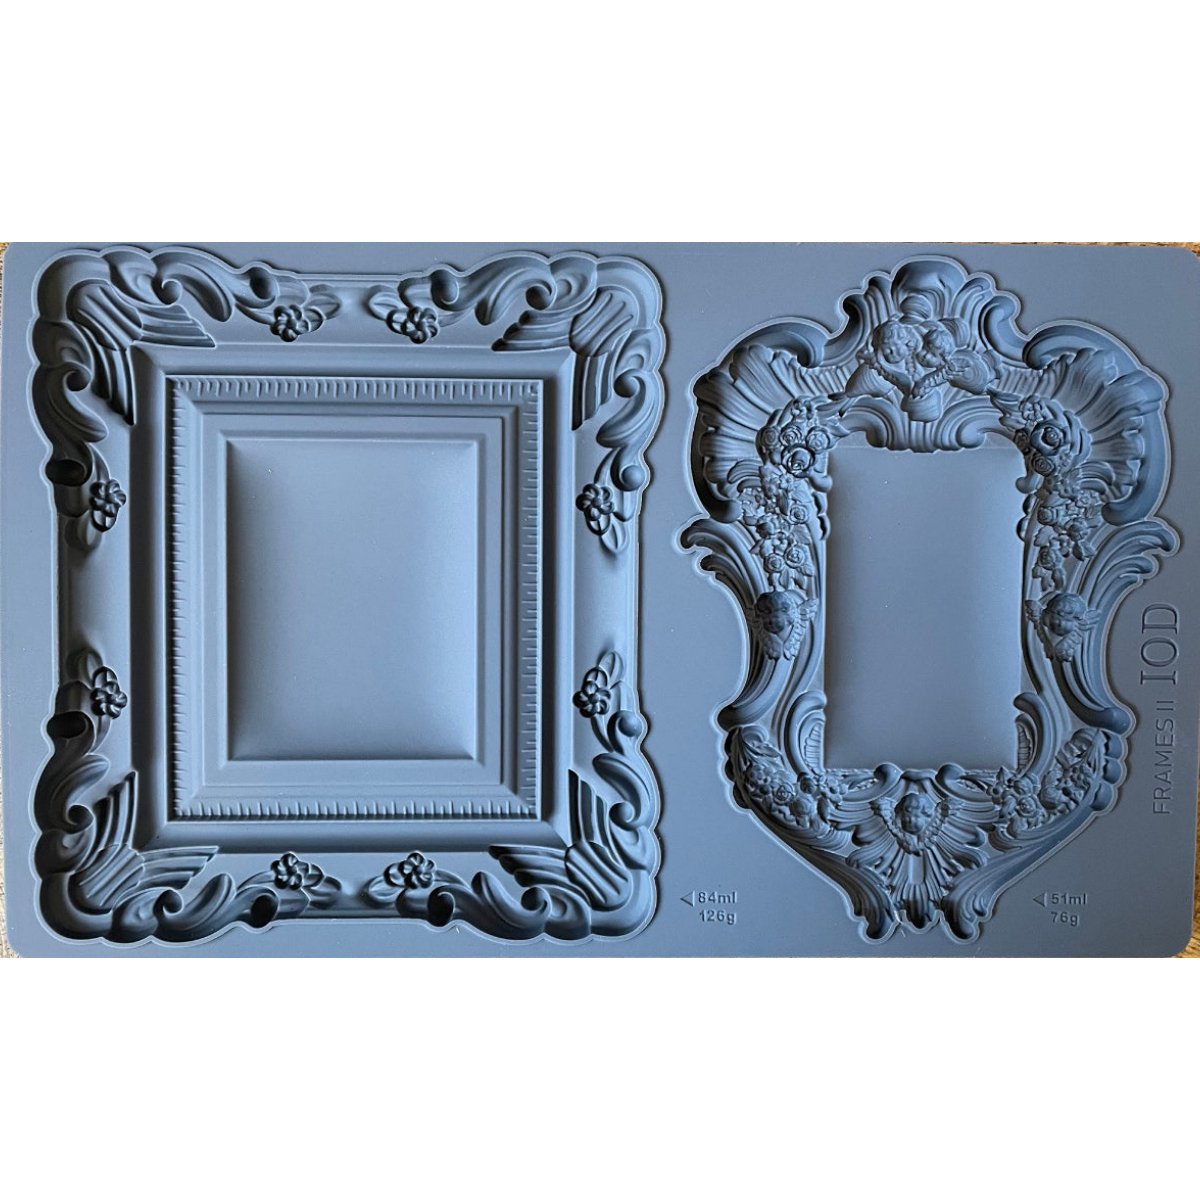 Iron Orchid Designs - Frames 2 Decor Mould - Rustic River Home